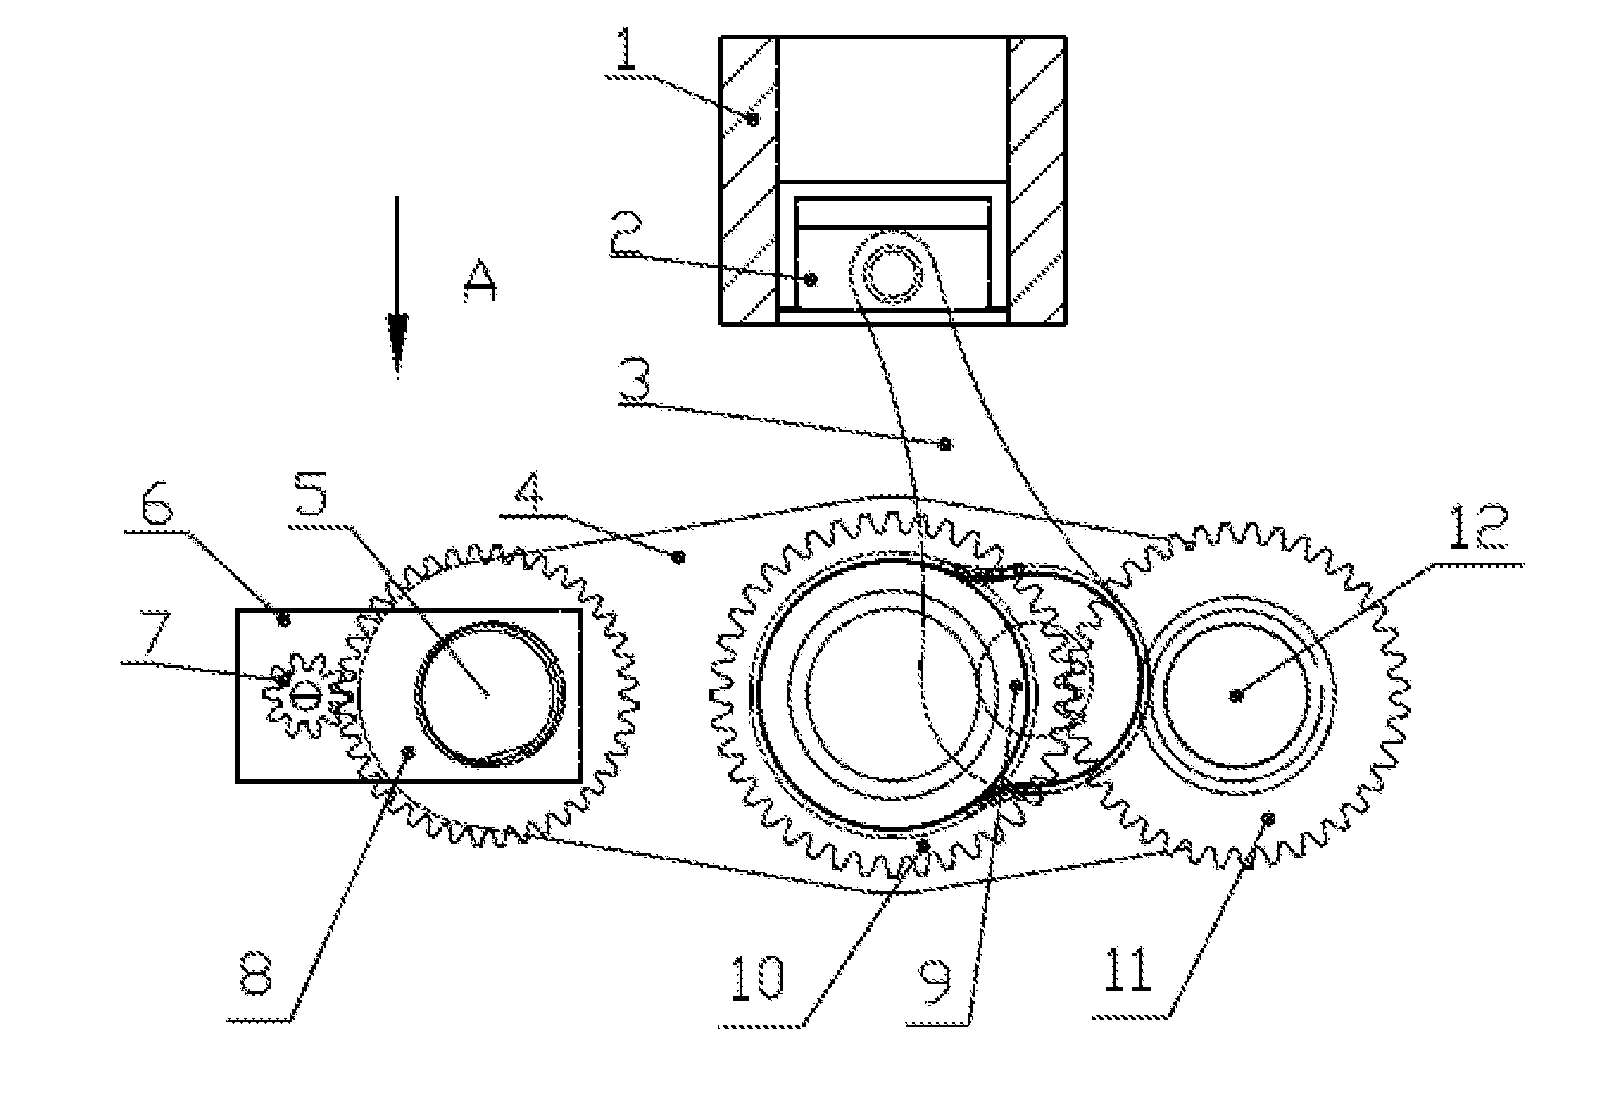 Engine With Variable Compression Ratio